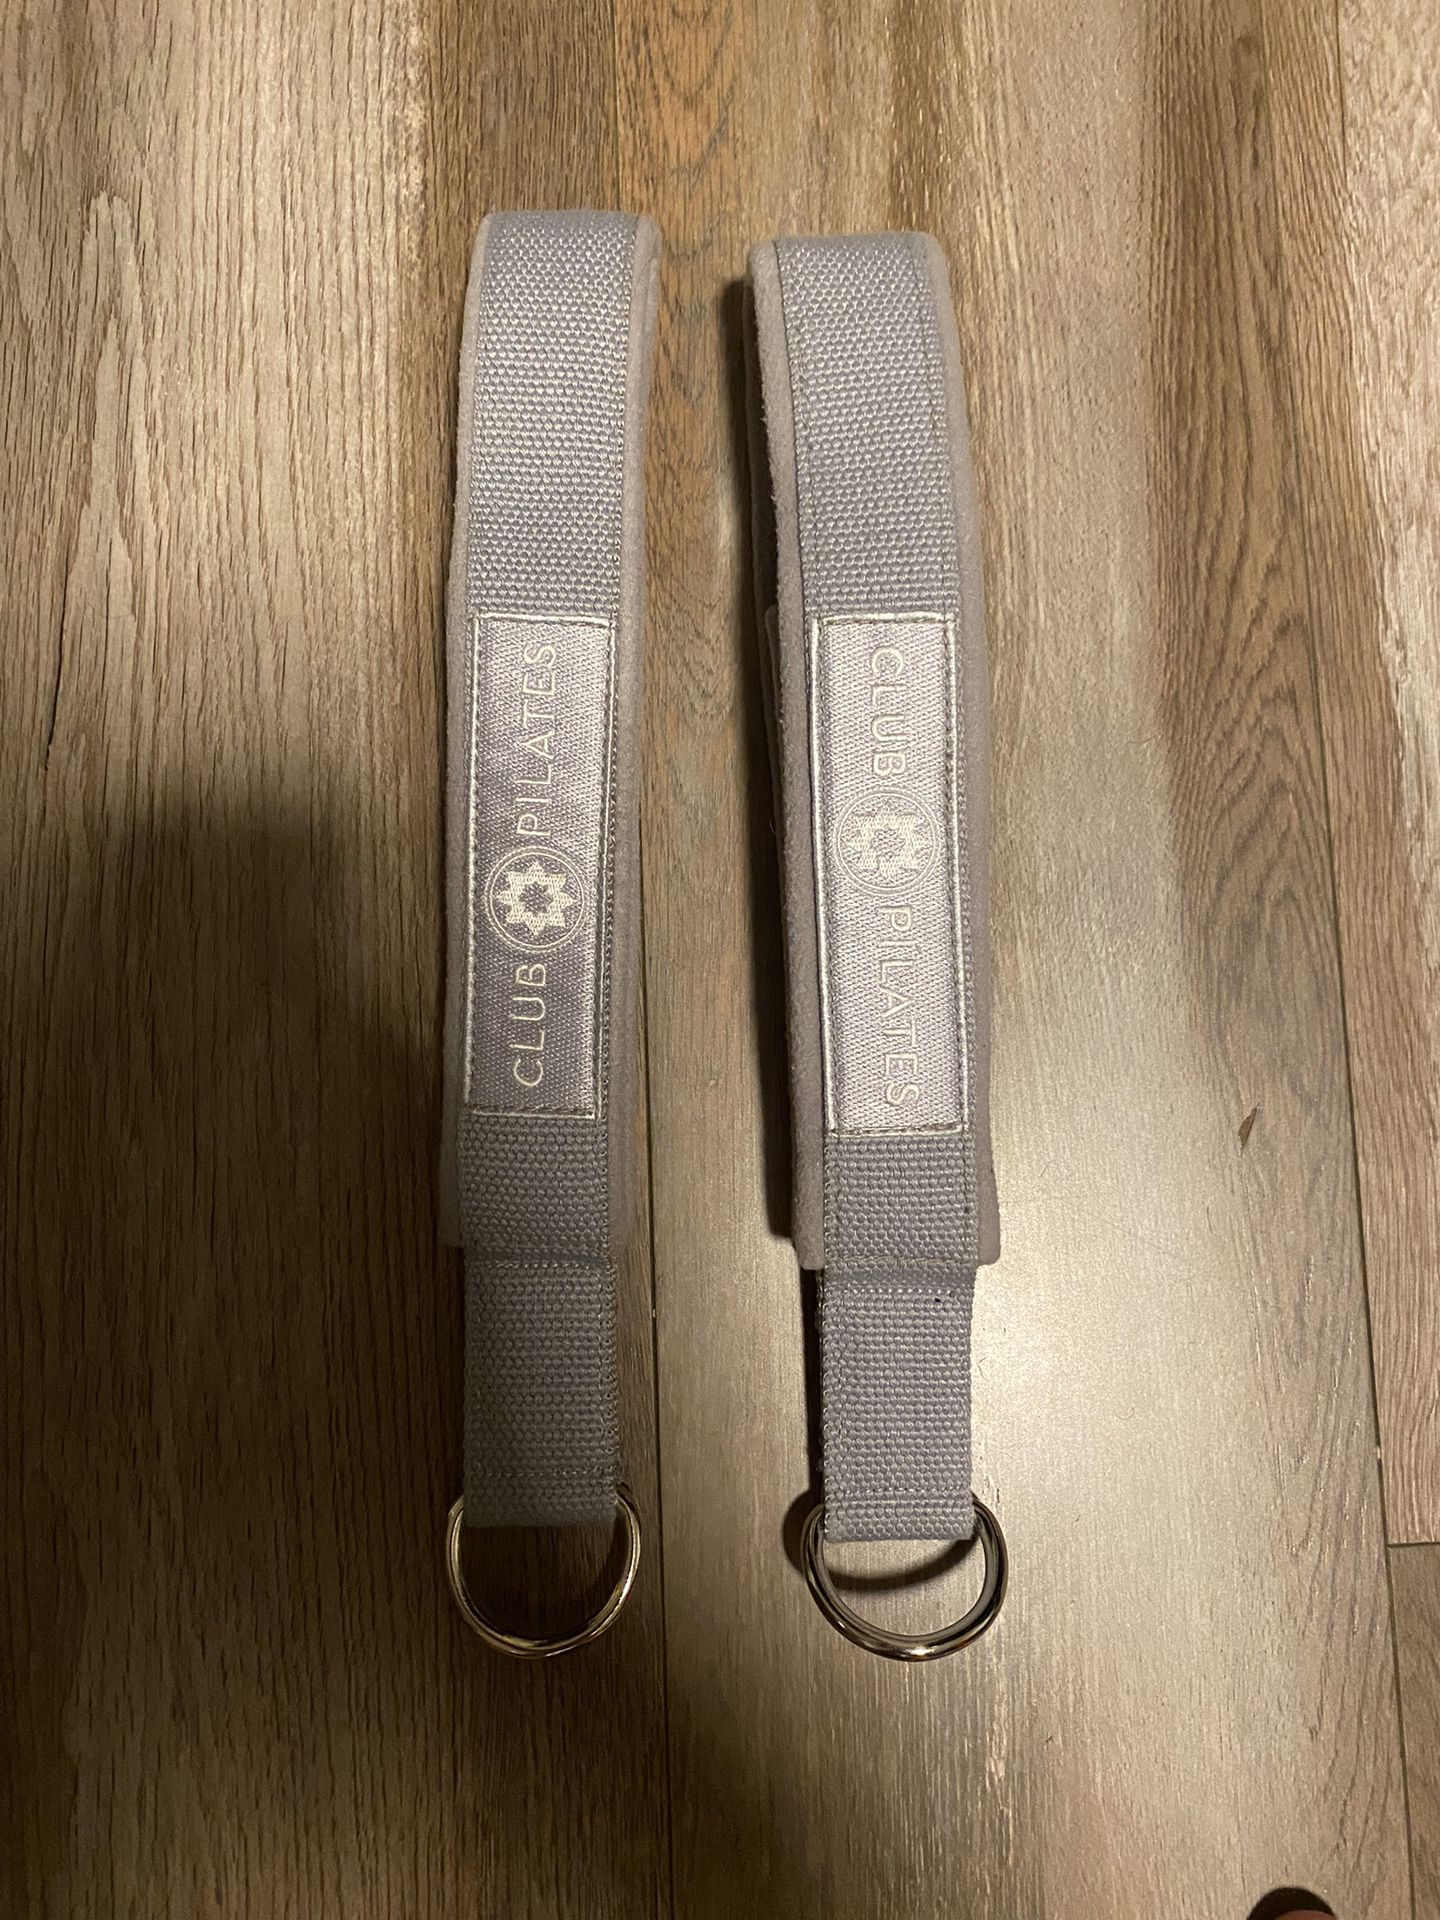 Club Pilates Straps/ Loops - Brand New for Sale in Irvine, CA